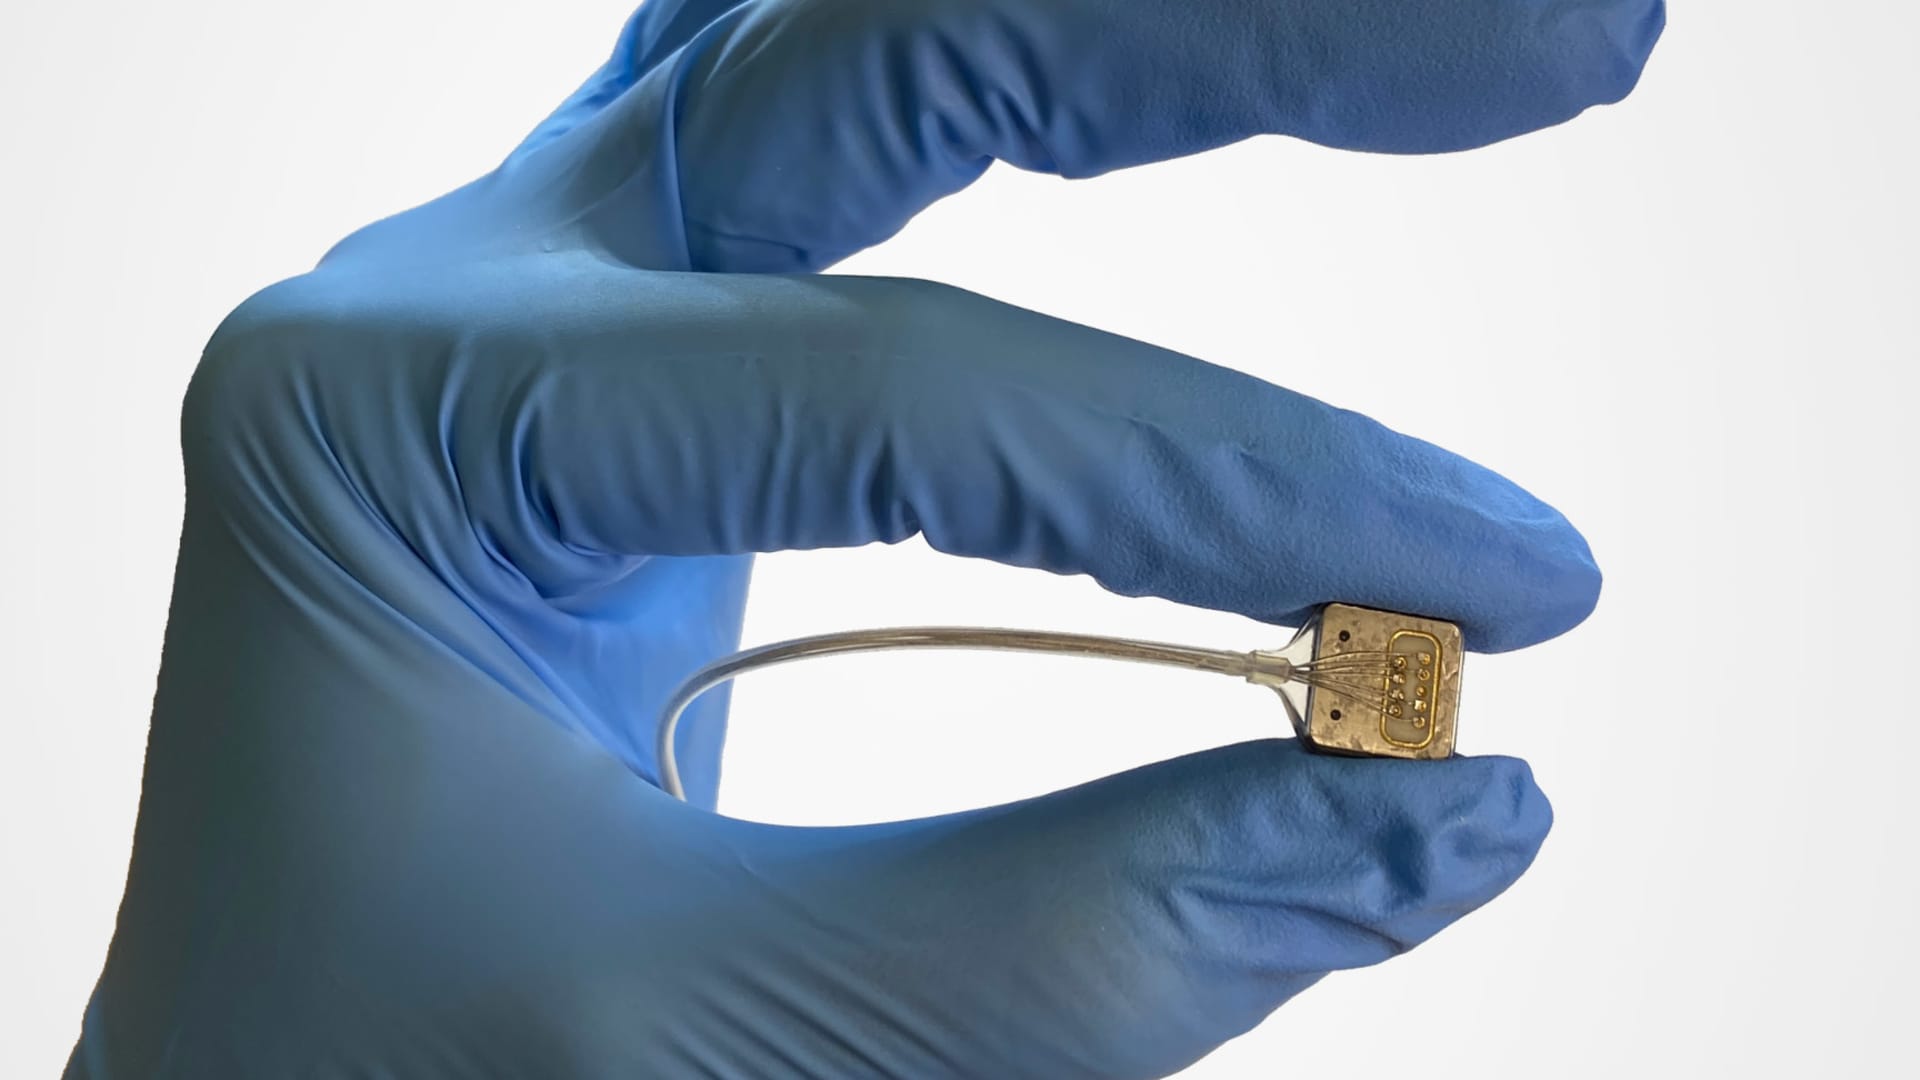 Neuralink competitor Paradromics gets one step closer to FDA approval for its brain implant